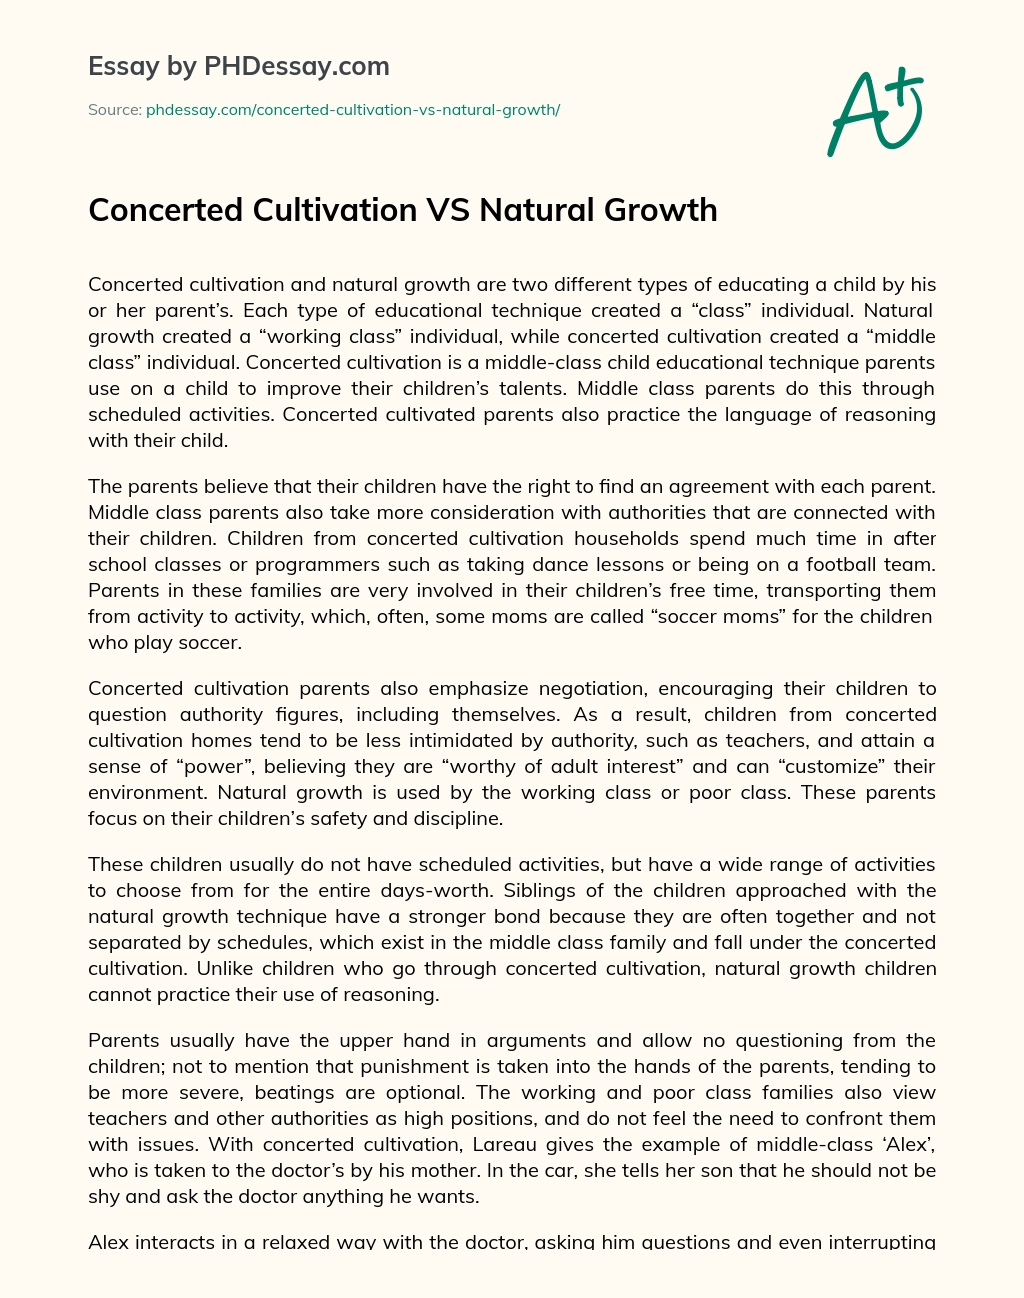 Concerted Cultivation VS Natural Growth essay